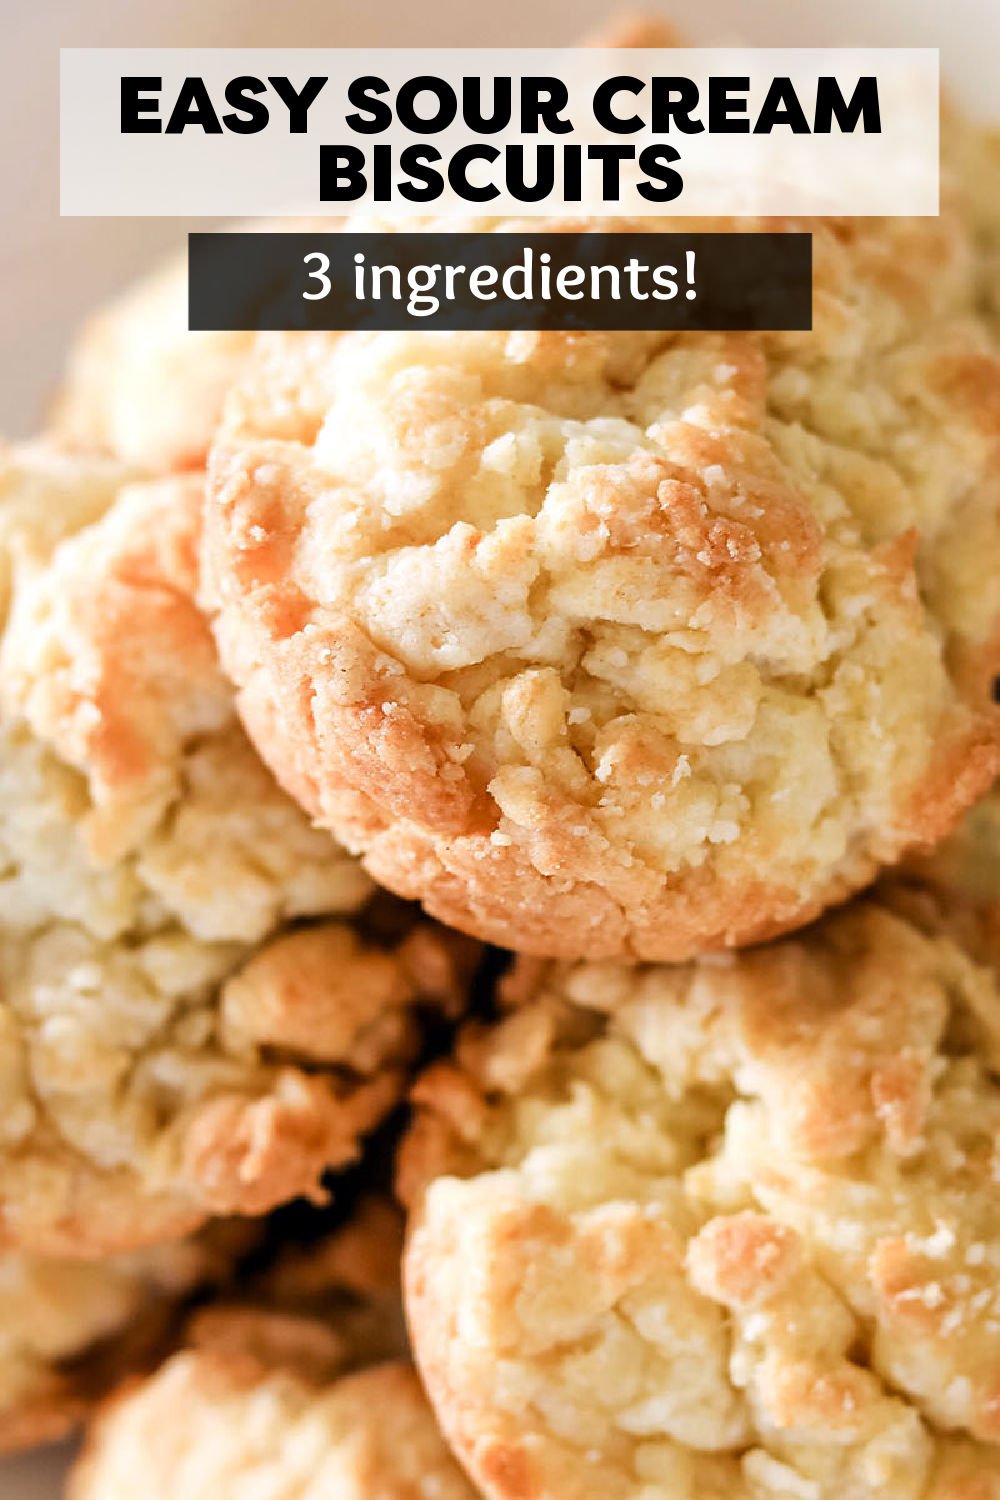 Did you know you can make homemade biscuits with just three ingredients? They are so easy - all you need is self-rising flour, butter, and sour cream to make buttery drop biscuits. | www.persnicketyplates.com